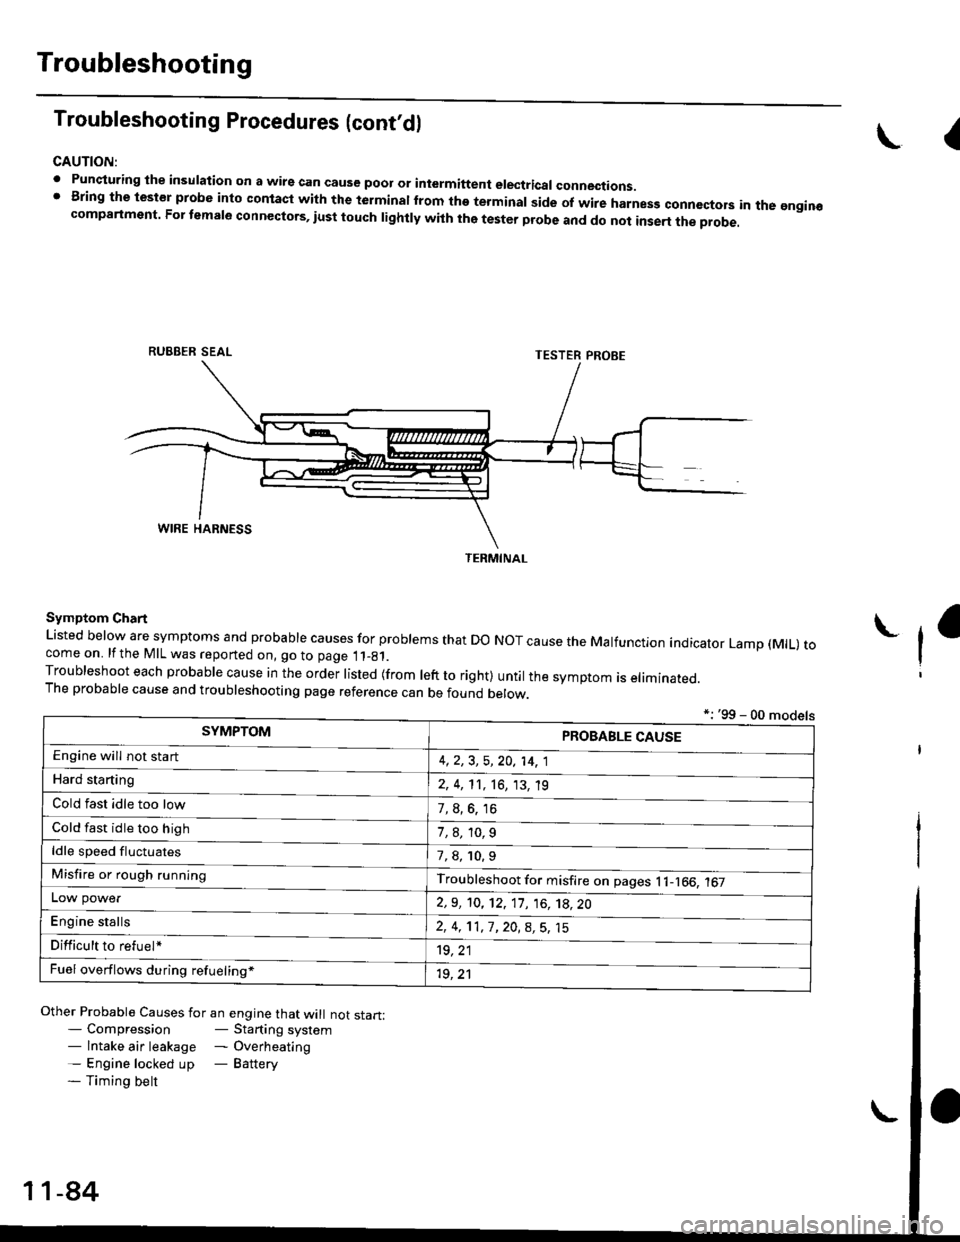 HONDA CIVIC 1996 6.G Owners Manual Troubleshooting
Troubleshooting Procedures (cont,dl
CAUTION:
. Punqturing ihe insulation on a wirs can cause poor or intermiftent electricar connections.I Bring the test€r probe into contacl with th